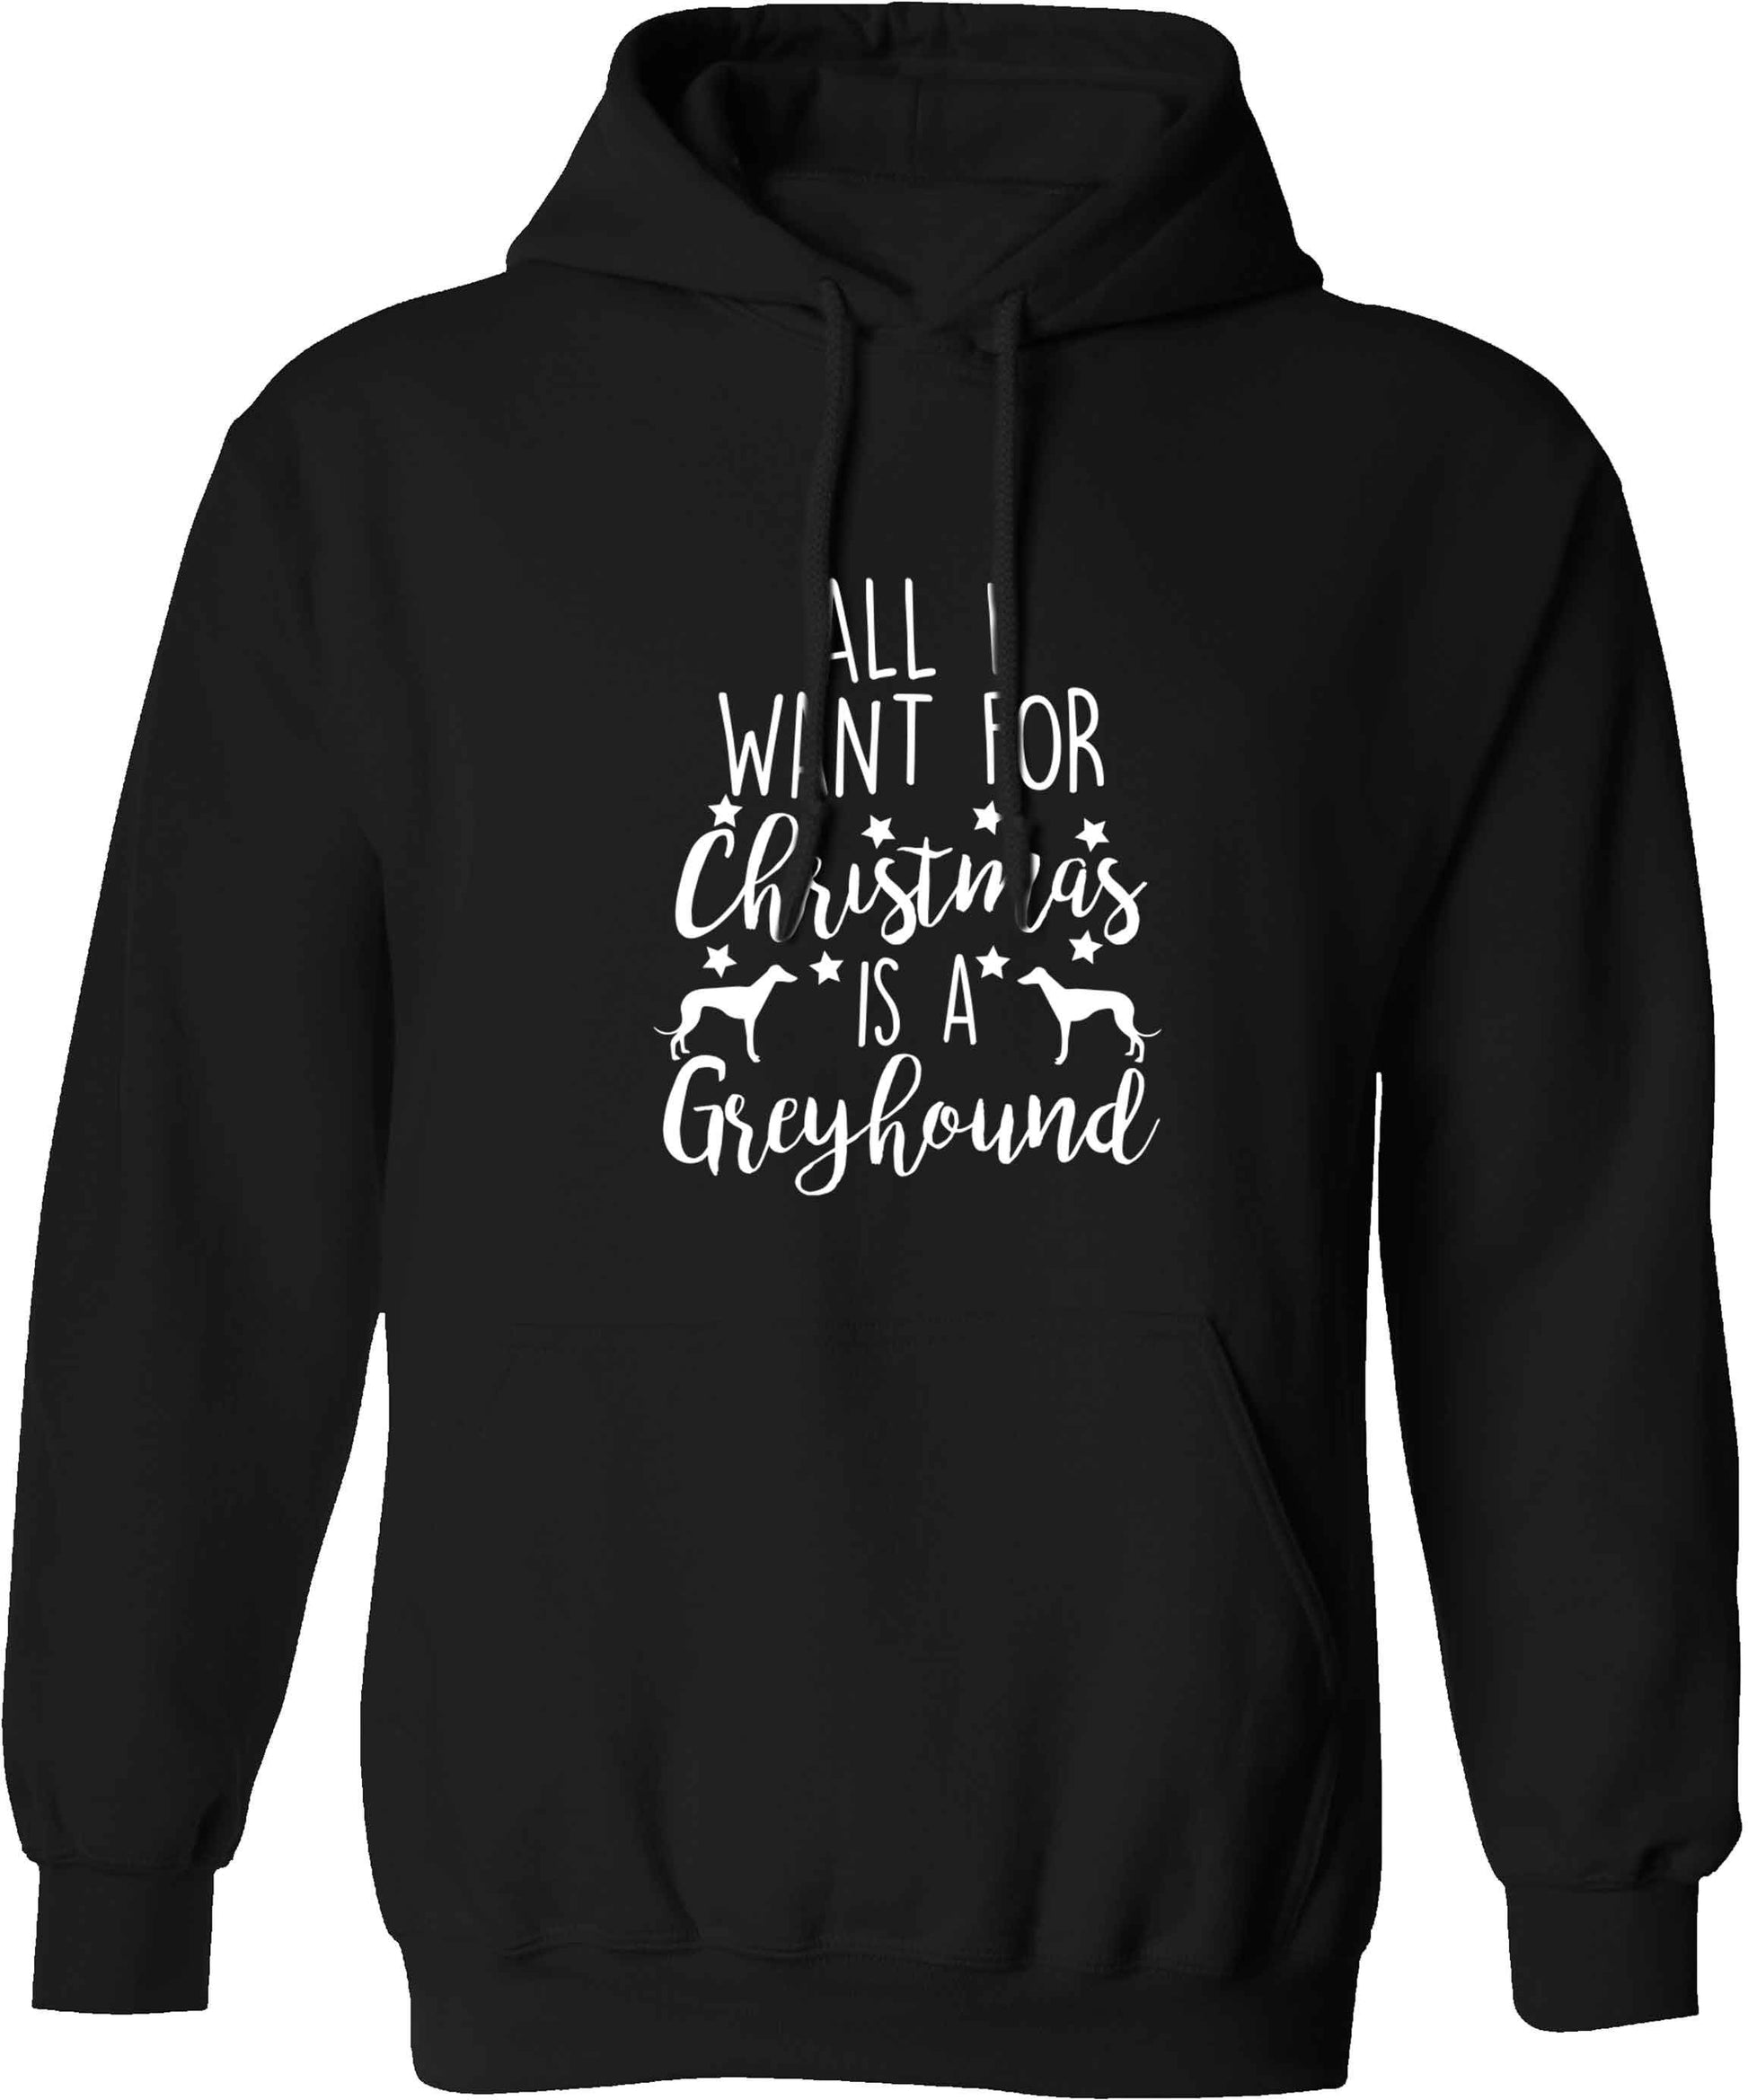 All I want for Christmas is a greyhound adults unisex black hoodie 2XL